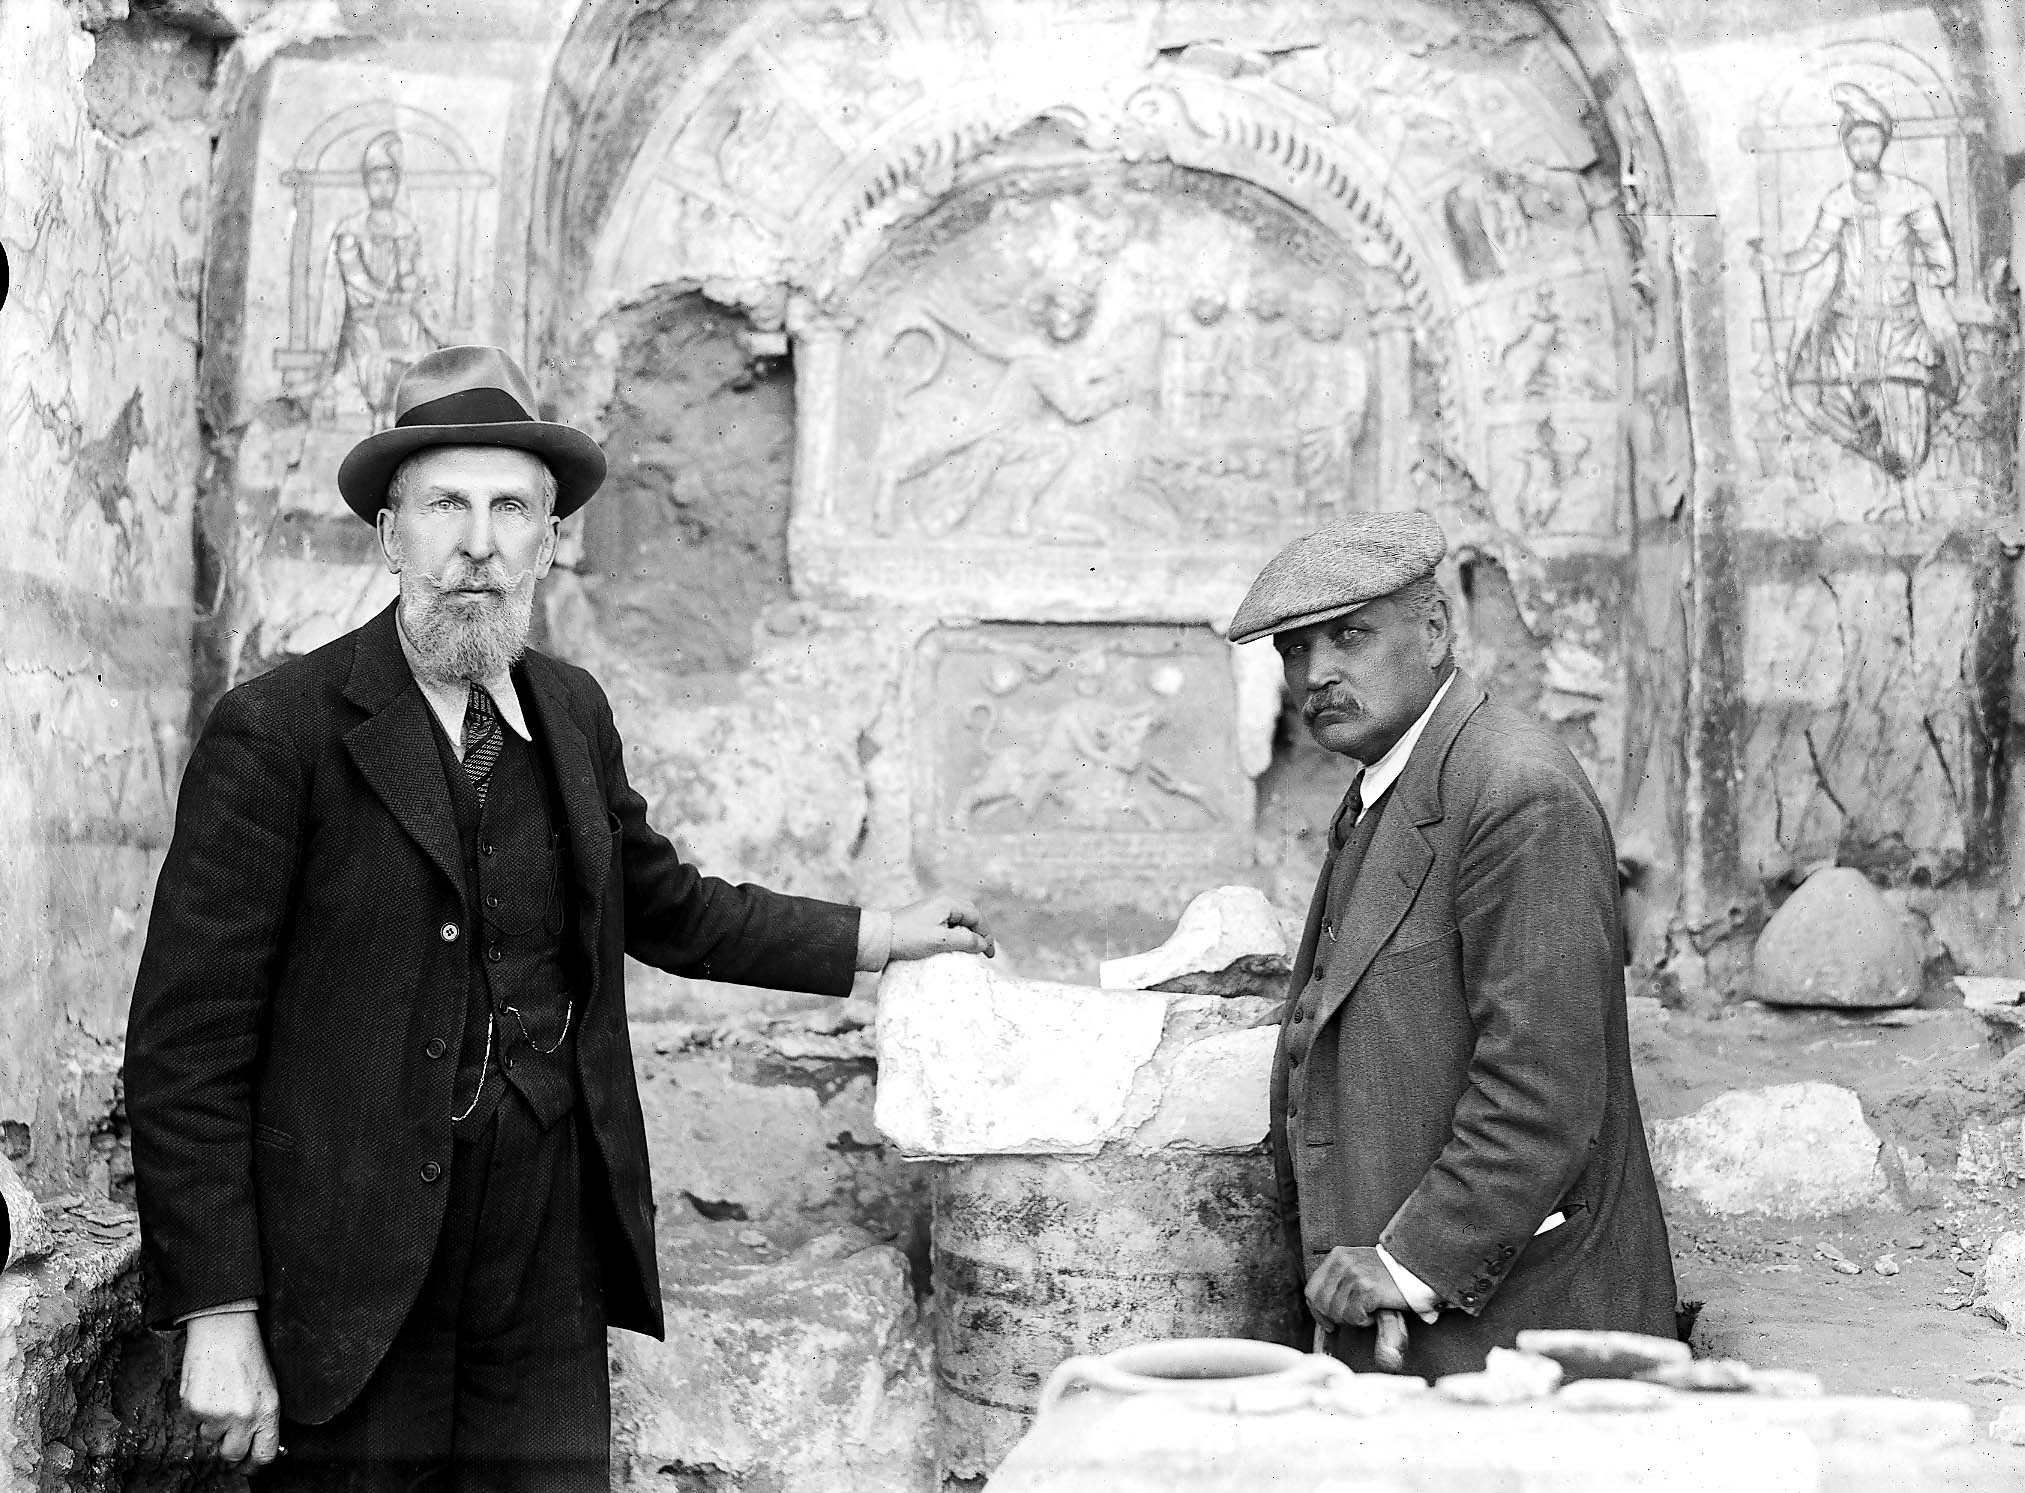 Franz Cumont poses in front of the main altar at the Mithraeum of Dura Europos